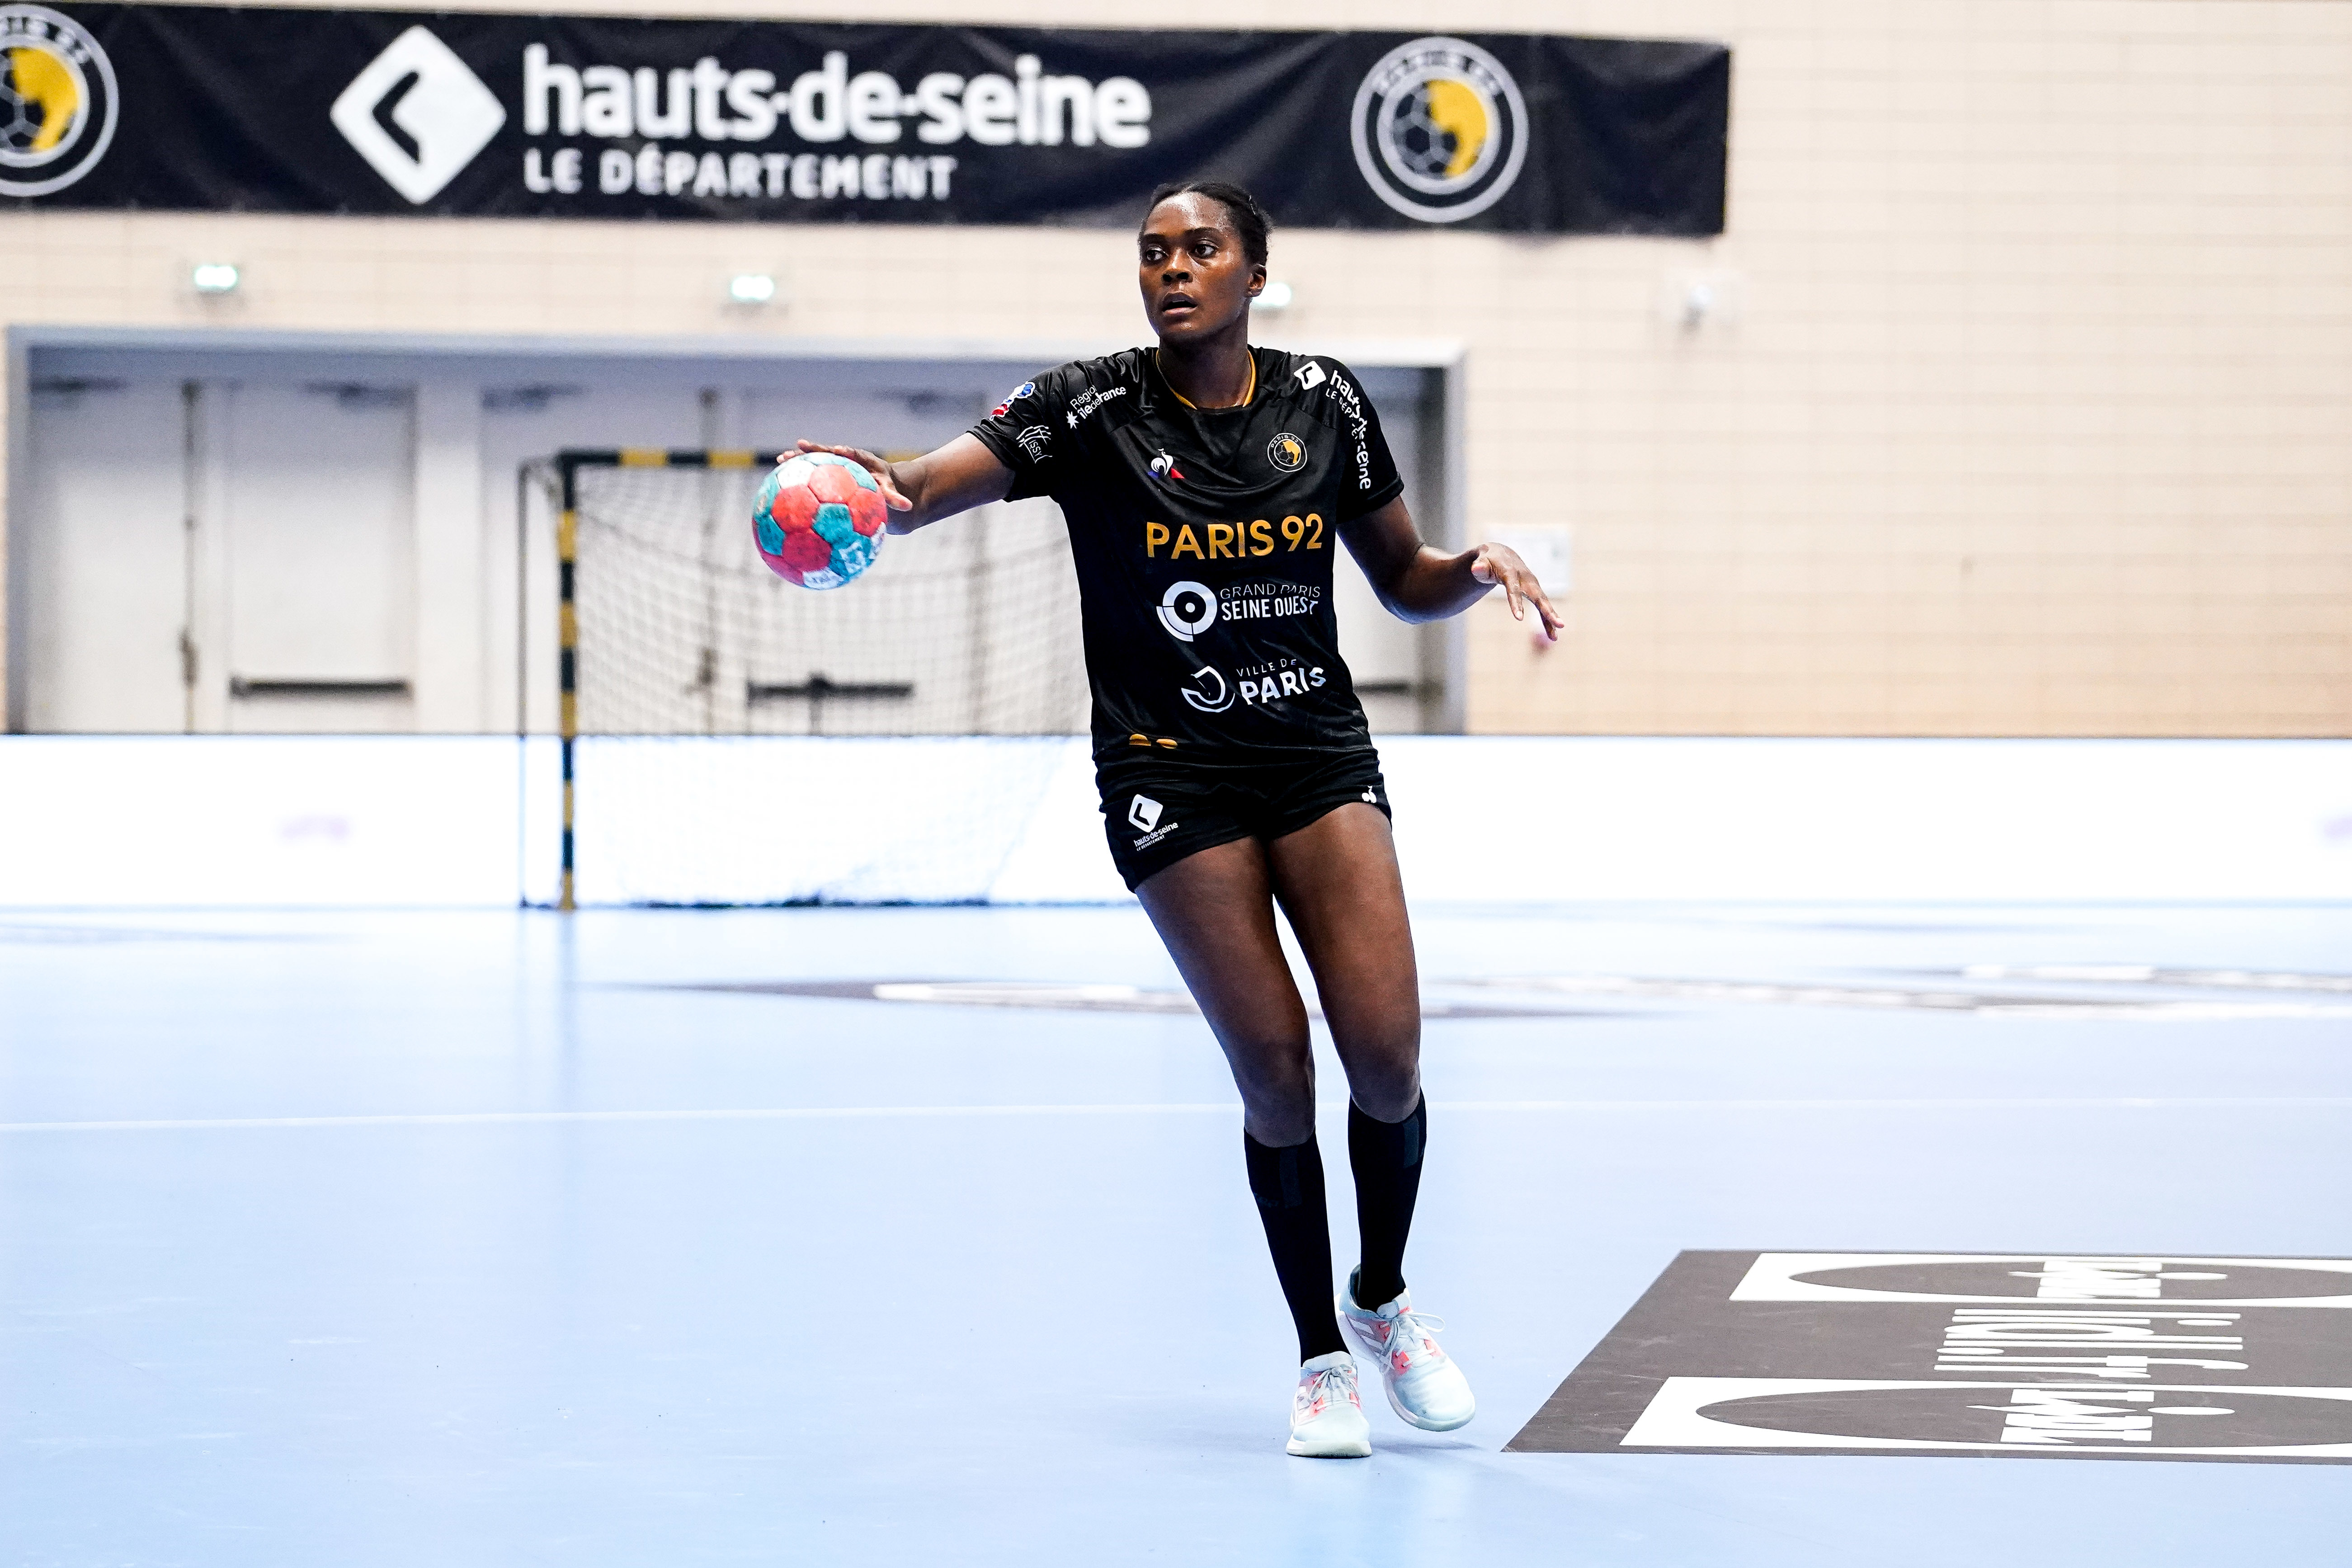 Gnonsiane NIOMBLA of Paris 92  during the Ligue Butaguaz Energie match between Paris 92 and Chambray at Palais des Sports on September 8, 2021 in Paris, France. (Photo by Hugo Pfeiffer/Icon Sport) - Palais des Sports Robert Charpentier - Issy-les-Moulineaux (France)